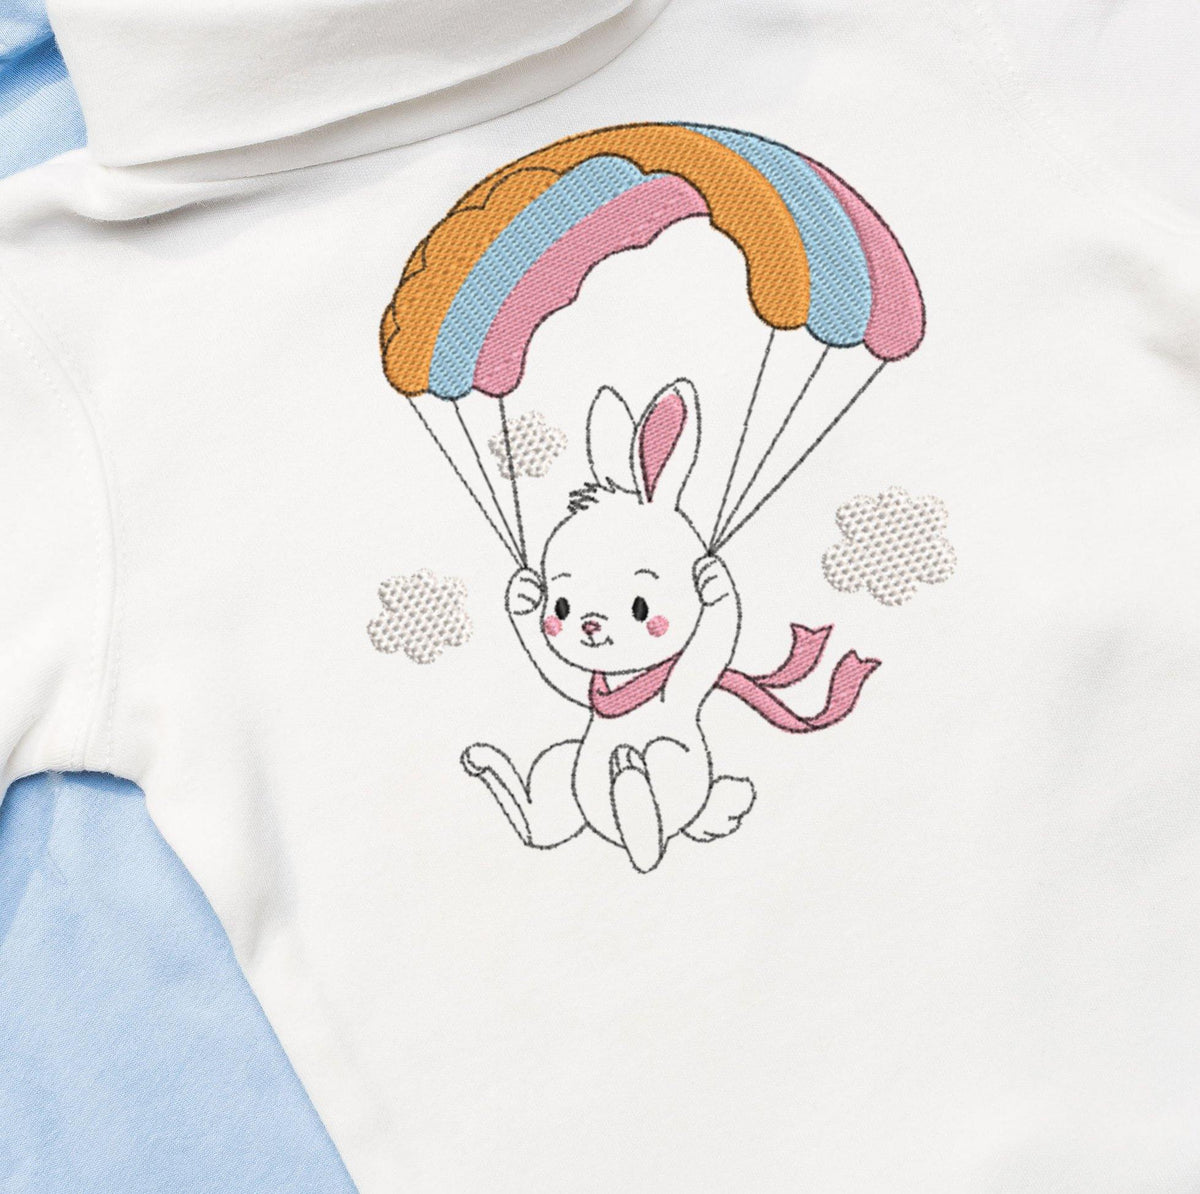 Parachute Bunny 2021 Embroidery Design - Oh My Crafty Supplies Inc.